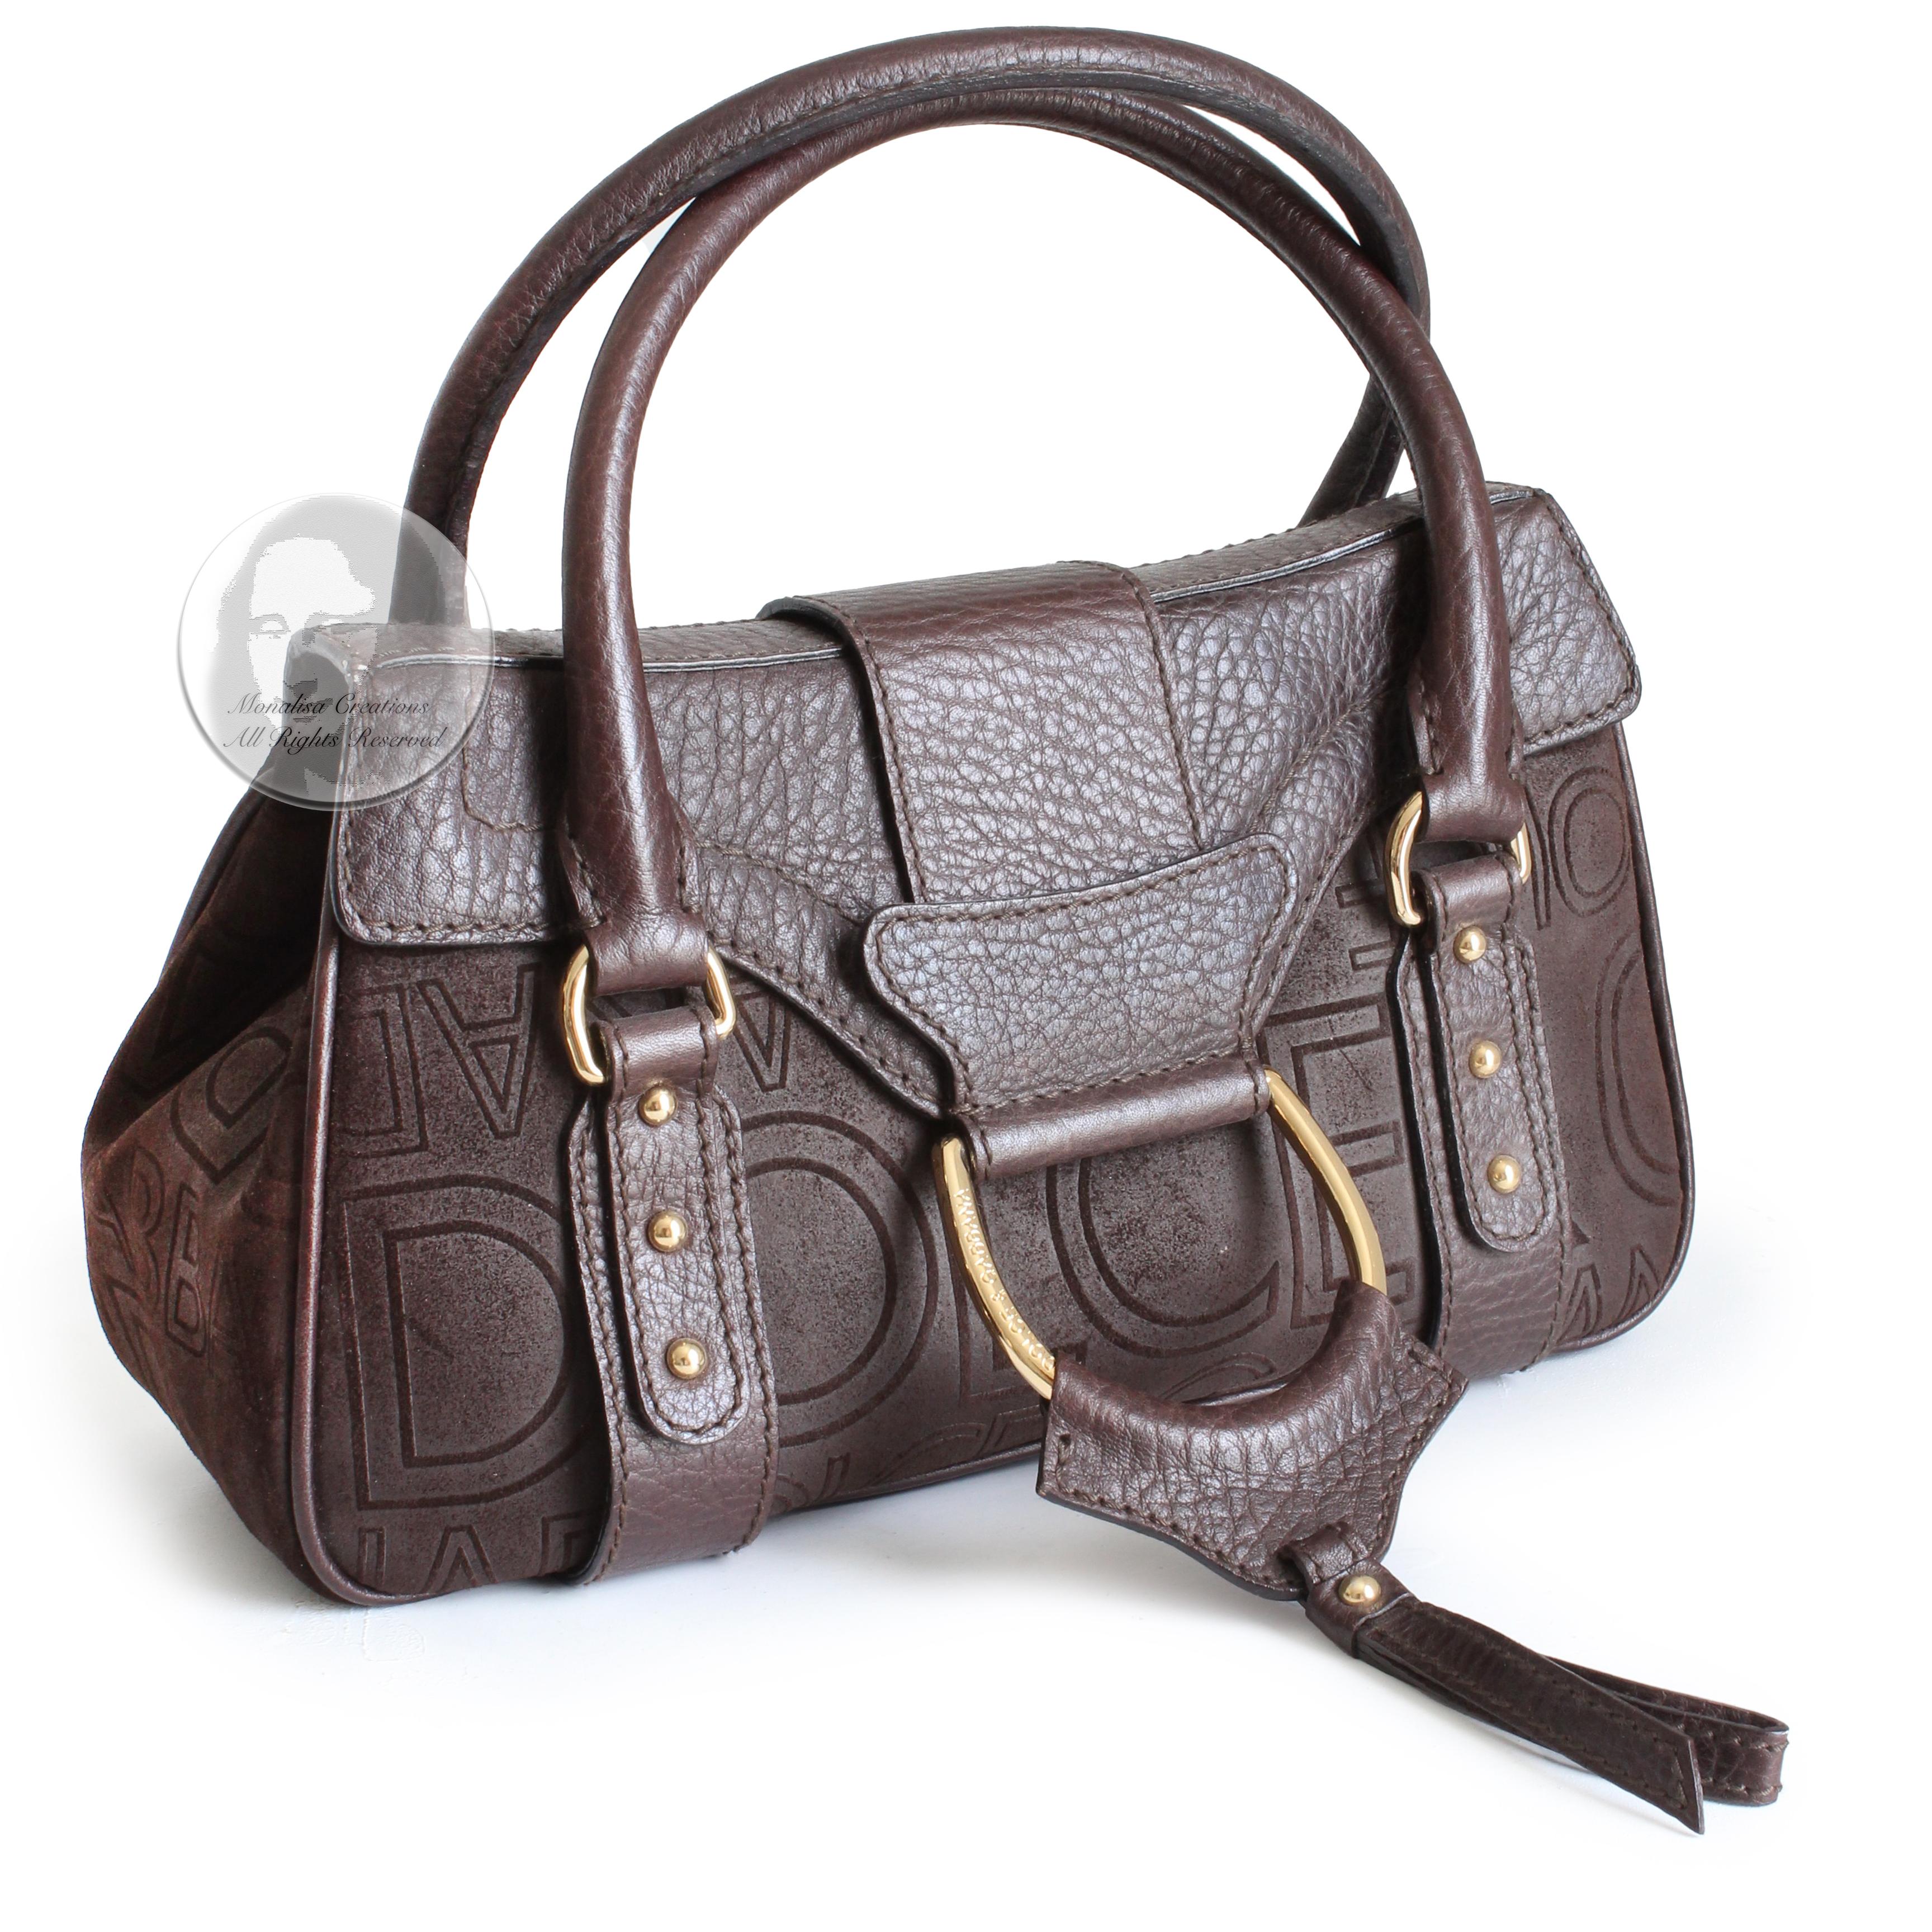 Authentic, preowned Dolce & Gabbana brown D-ring flap bag, likely from the 2000s. 

Made from sueded leather with pebbled leather trim, it features abstract Dolce & Gabbana logos throughout. Fastens with hidden magnet under flap and lined in logo